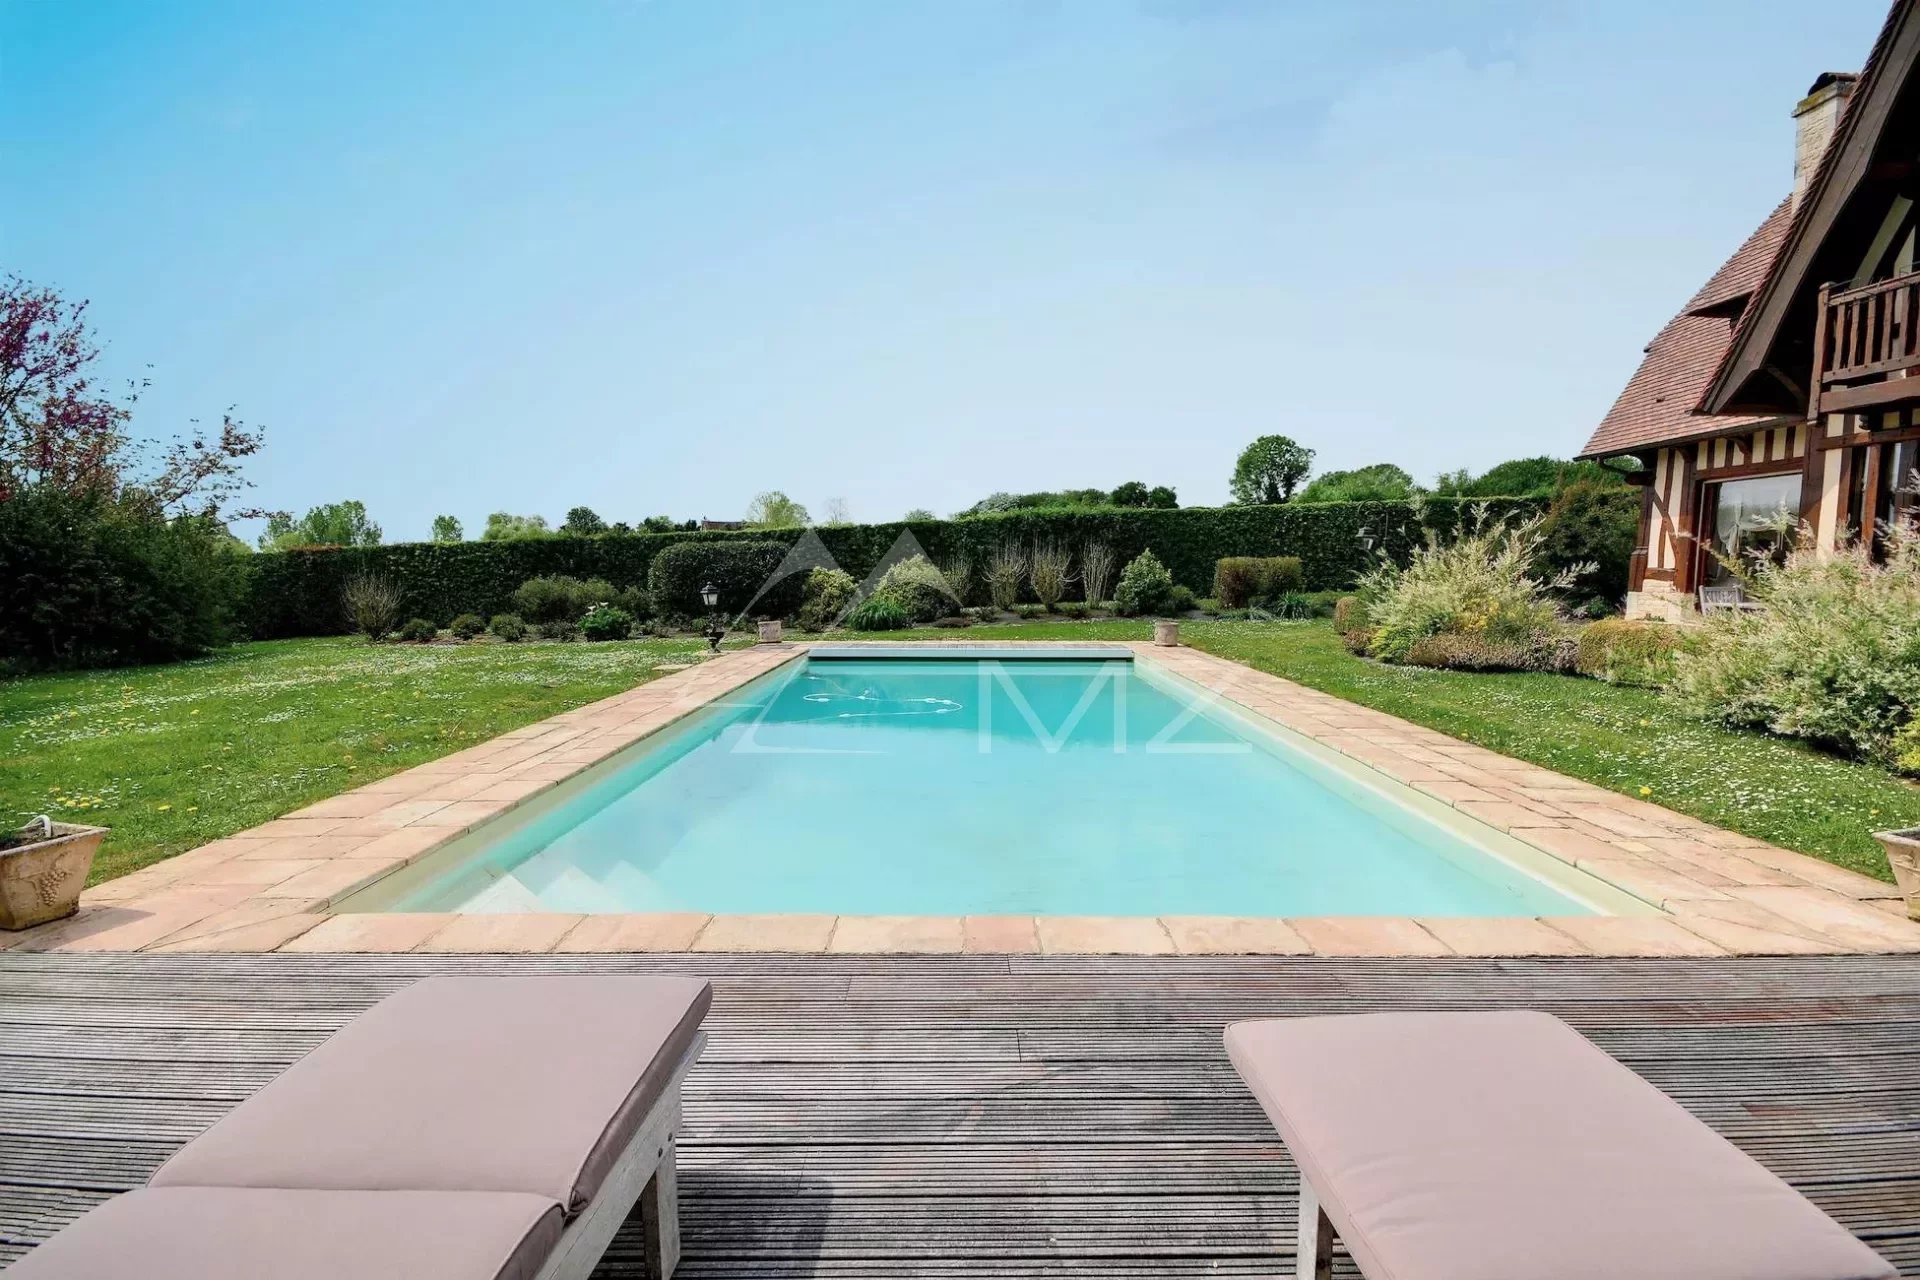 LEBAS HOUSE WITH SWIMMING POOL IN THE HEART OF A VILLAGE